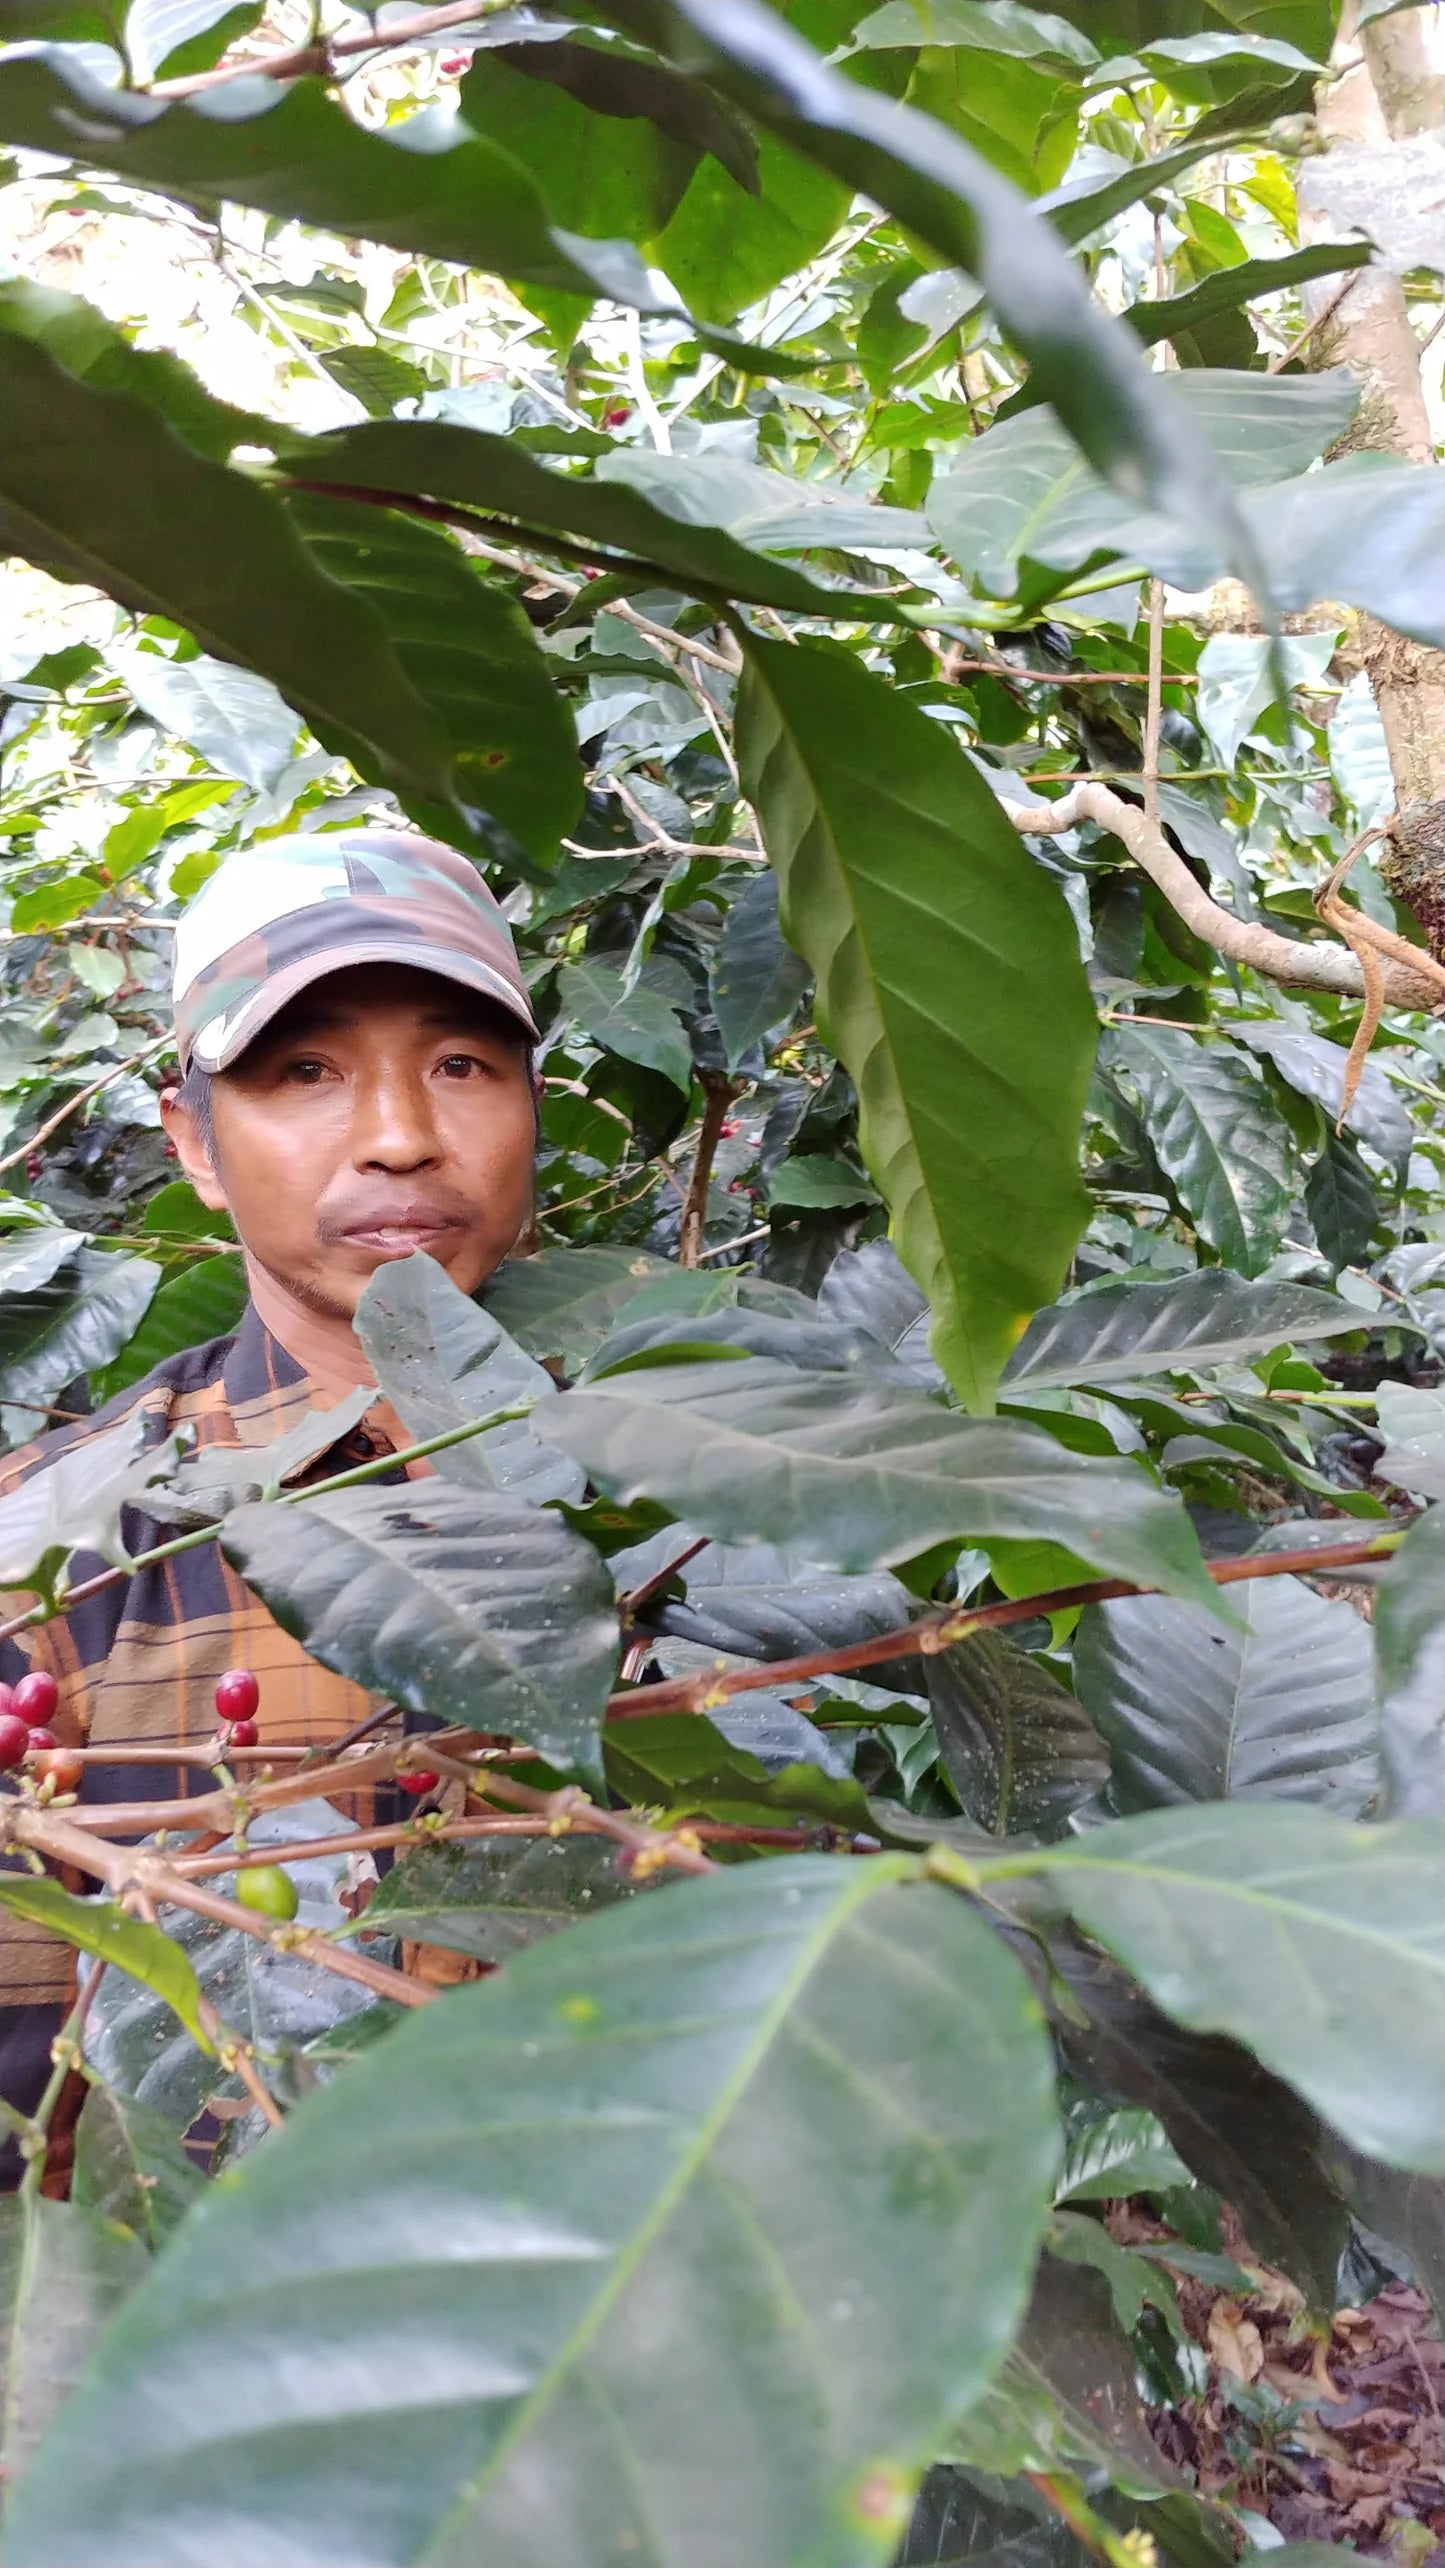 Rogue Wave Coffee Roasters' Myanmar Myay Ni Kone Catuai Natural coffee with flavors of pear, blueberry, white grape, almond, and vanilla. Discover Shwe Taung Thu Coffee's support for smallholder farmers in Myanmar's Shan State.